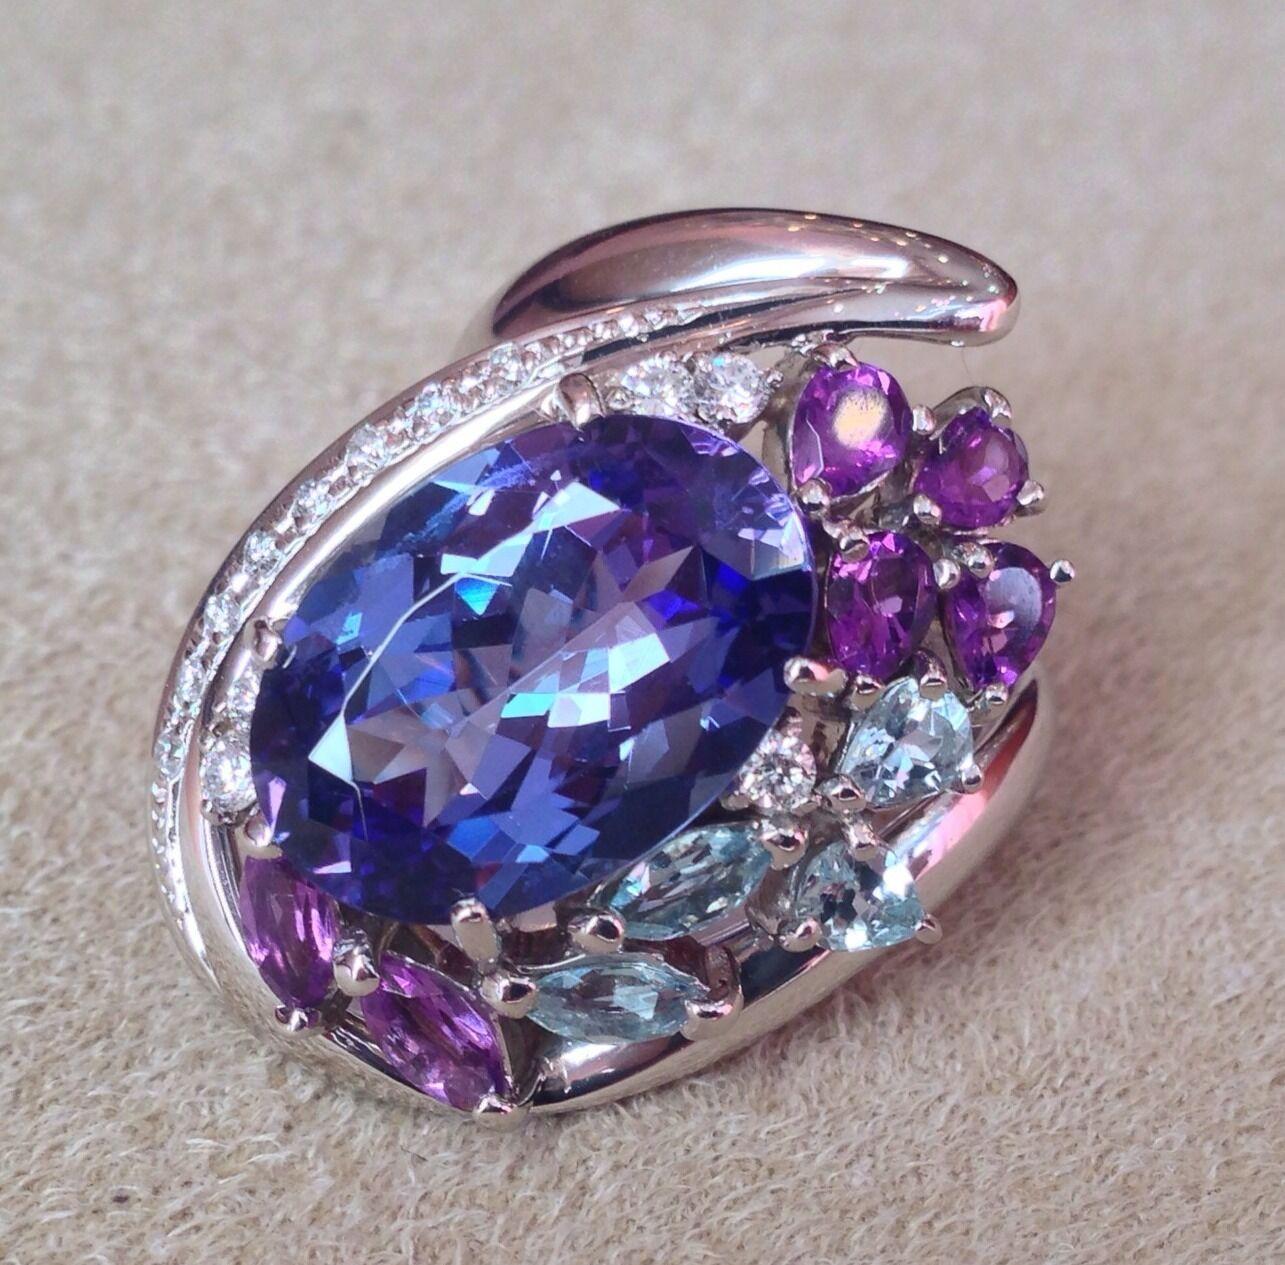 Tanzanite, Aquamarine, Amethyst and Diamond Ring in Platinum

The Ring features an Oval Shaped Tanzanite in the center weighing 7.39 carats with beautiful mix of Amethyst , Aquamarine and Diamonds all set in High Polished Platinum setting. 

Diamond